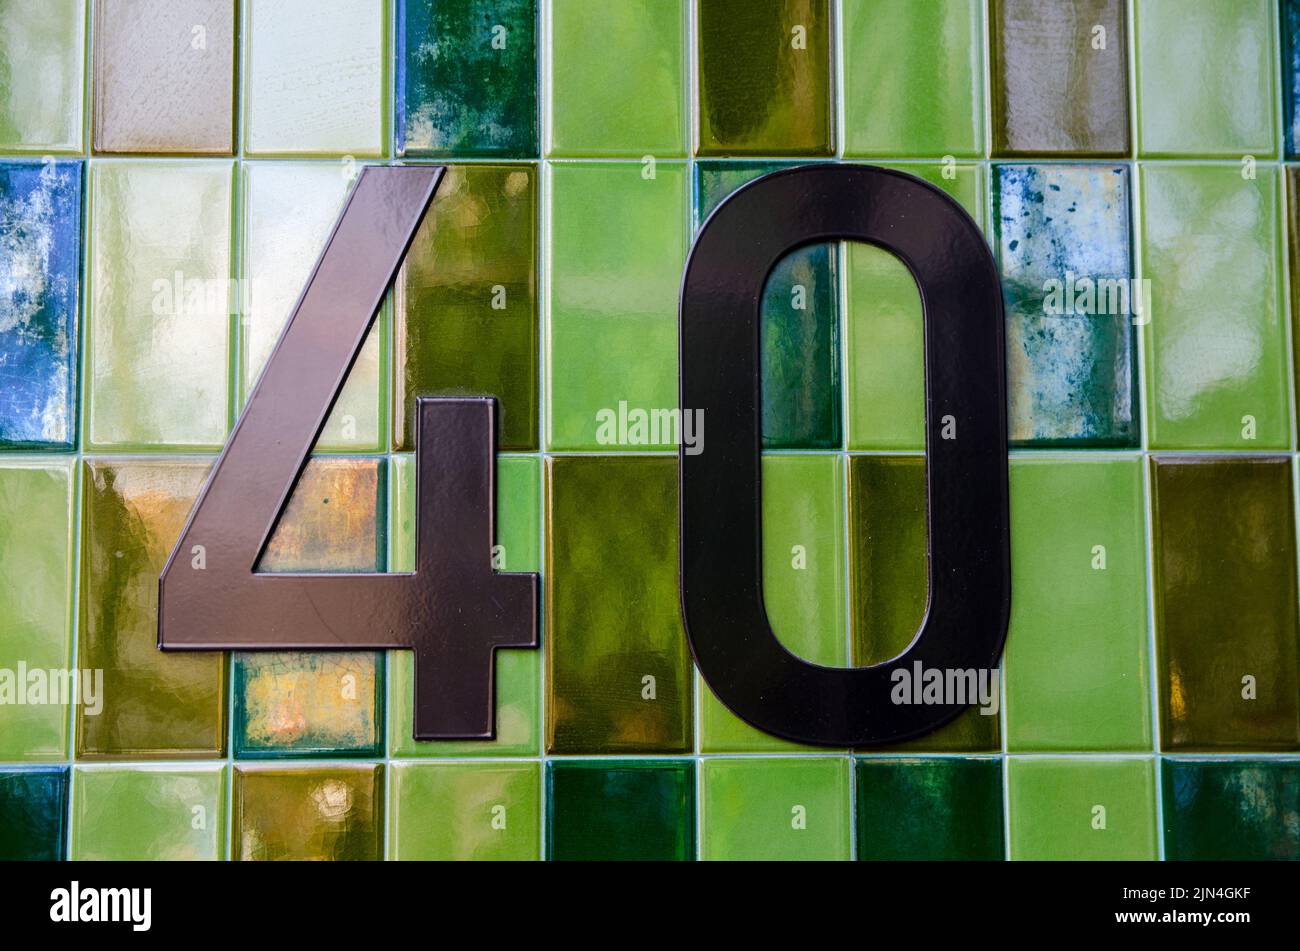 The figure 40 outside an office block in Central London.  Bronze numbers placed on green ceramic tiles. Stock Photo